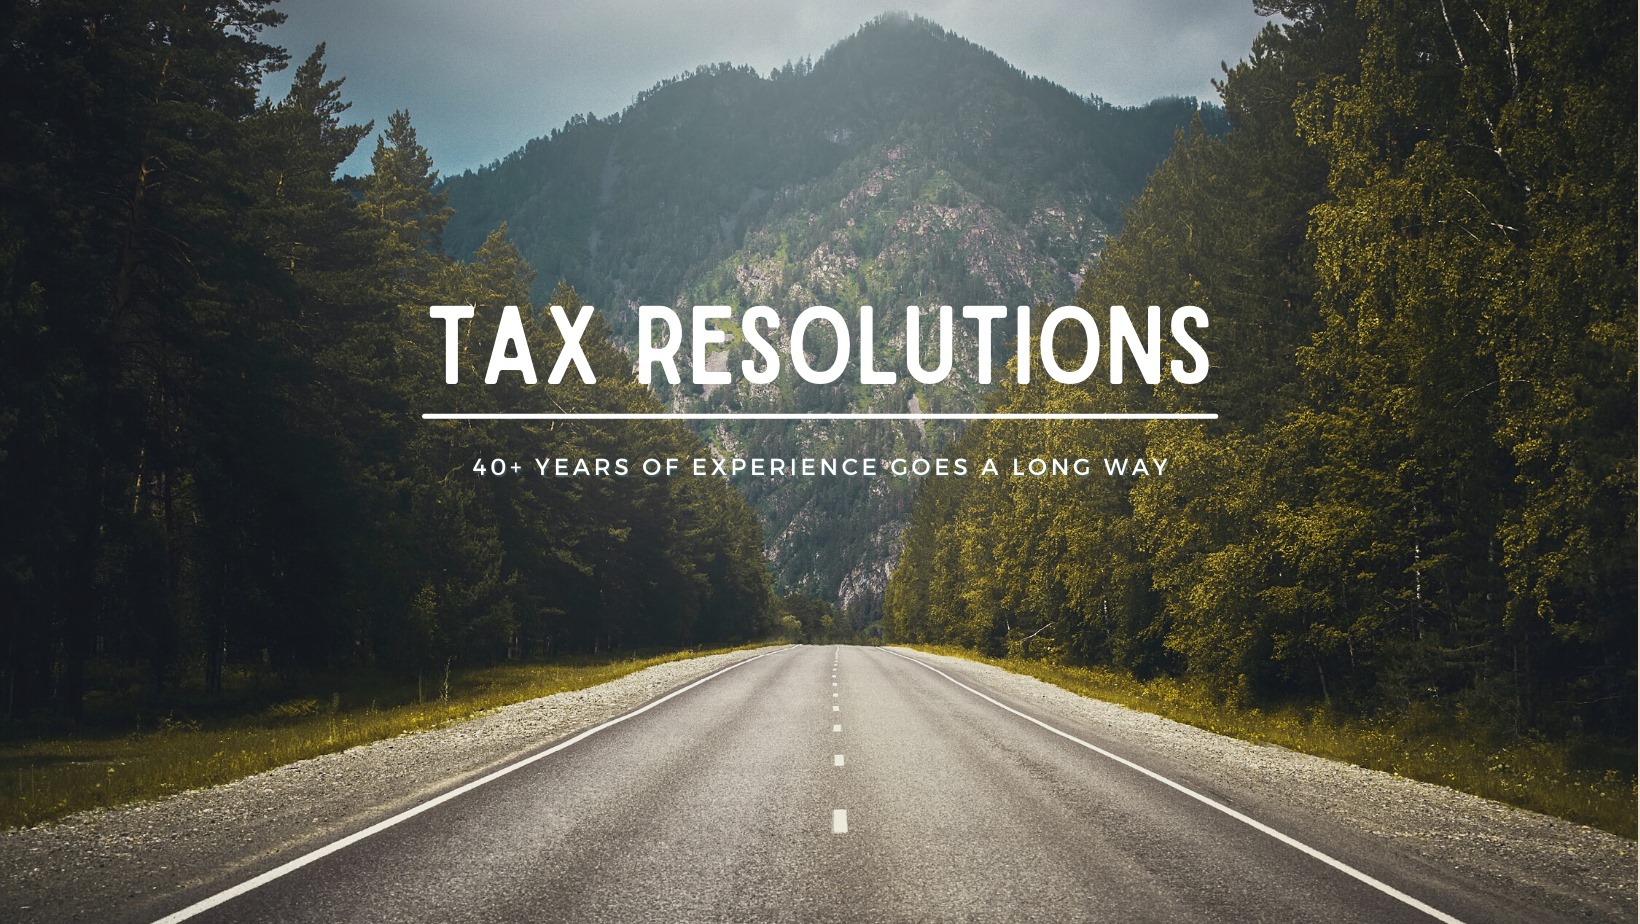 Tax Resolutions 337 Main St, Otego New York 13825